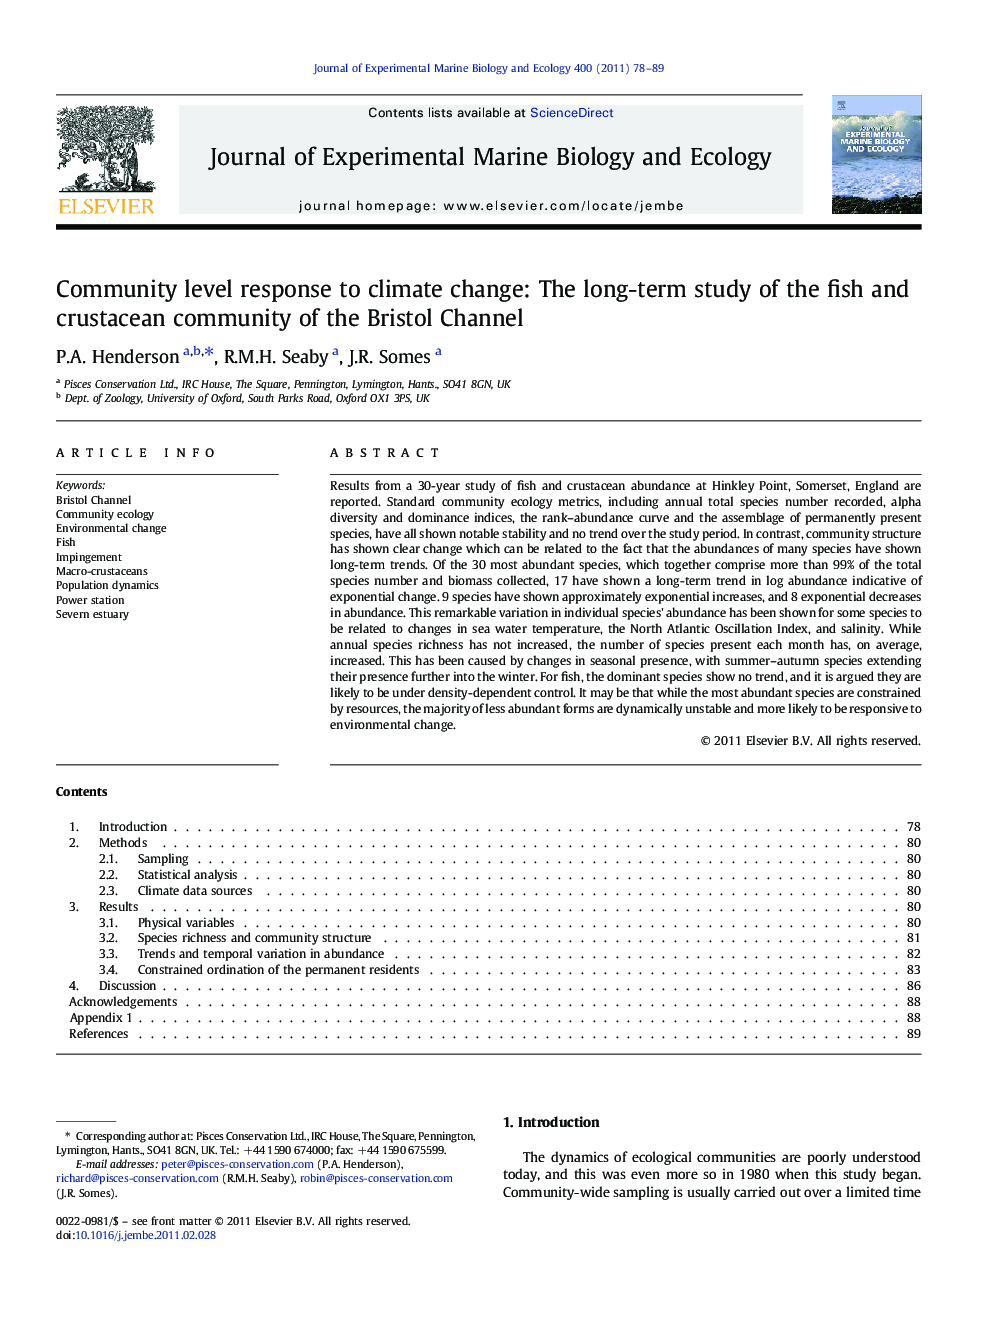 Community level response to climate change: The long-term study of the fish and crustacean community of the Bristol Channel